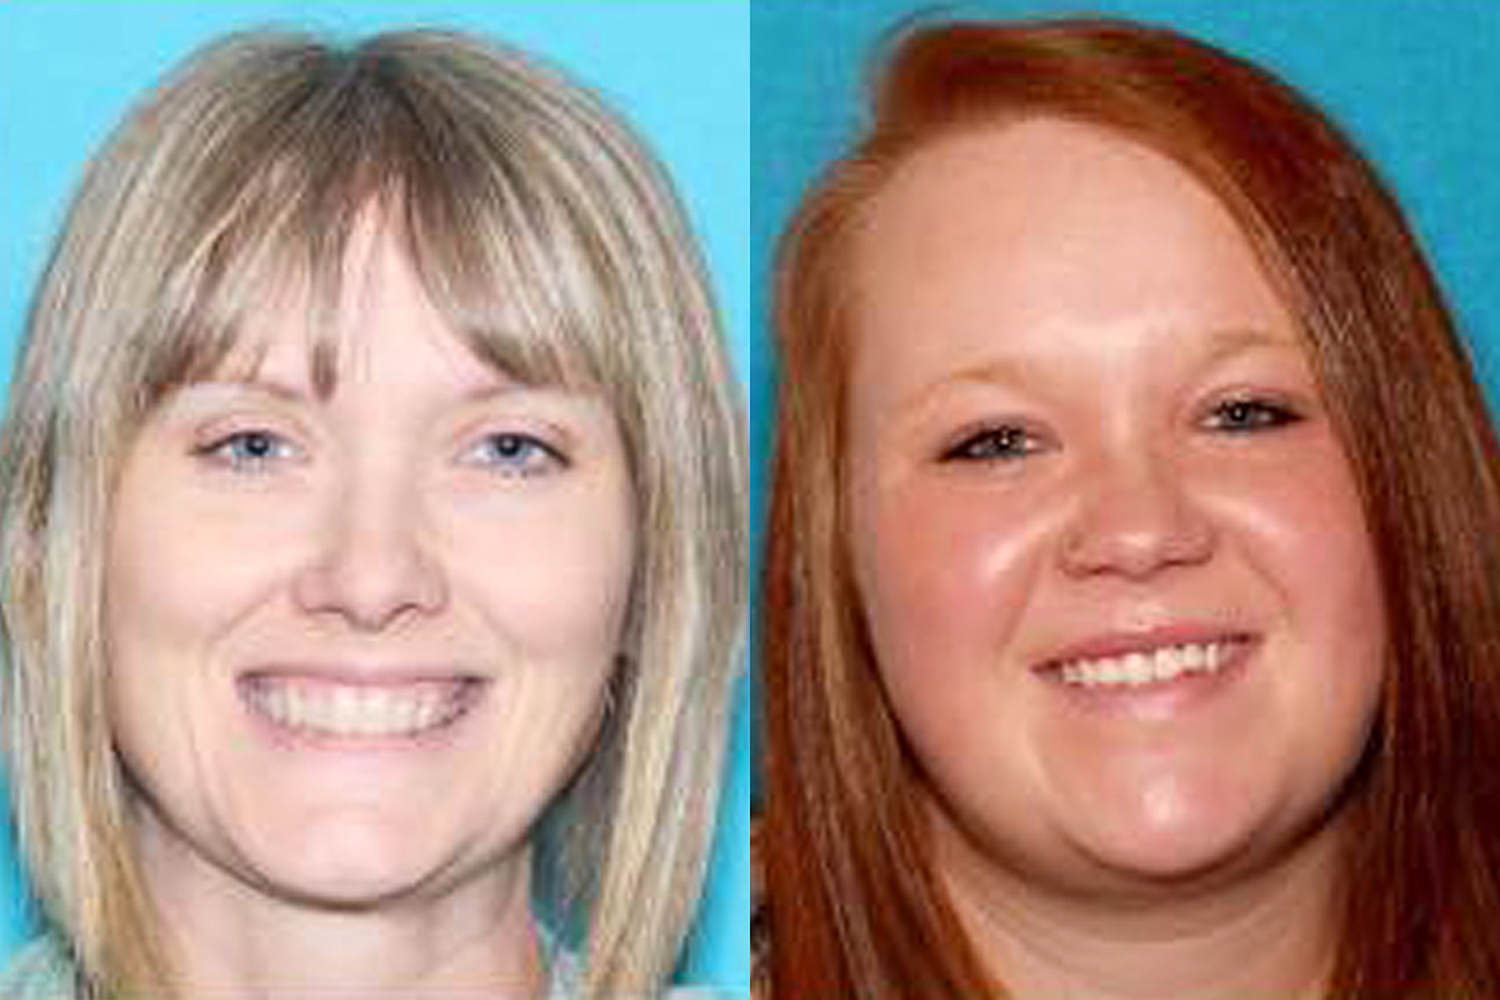 2 missing Kansas women may have been killed in bitter custody battle, officials say